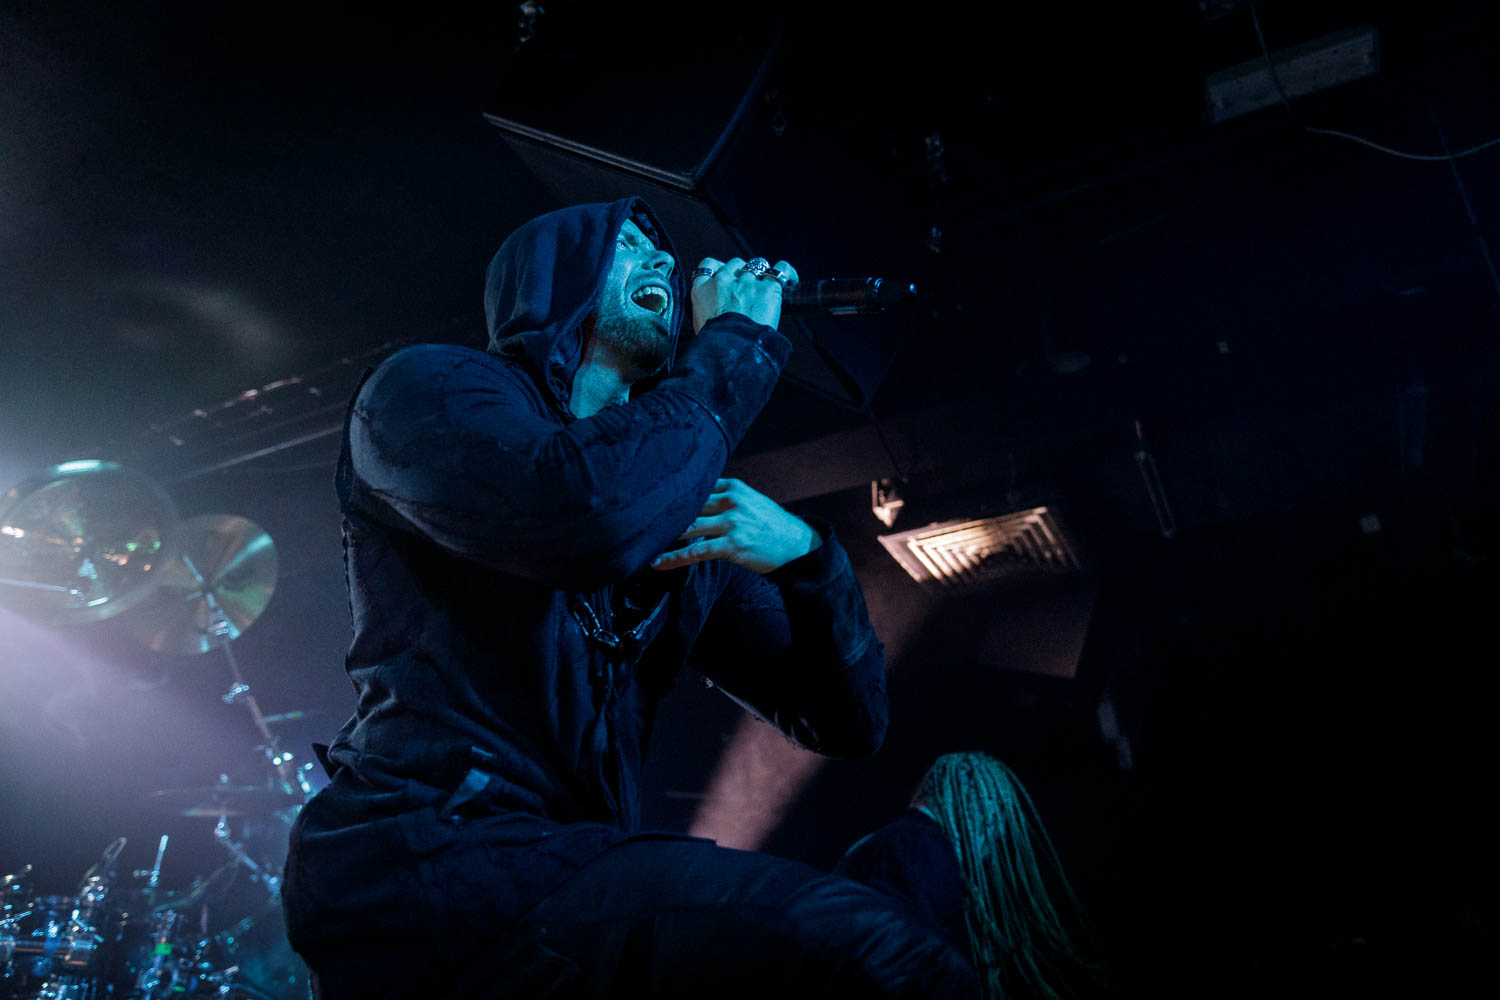 Kamelot at The Academy Club in Manchester on March 21st 2019.